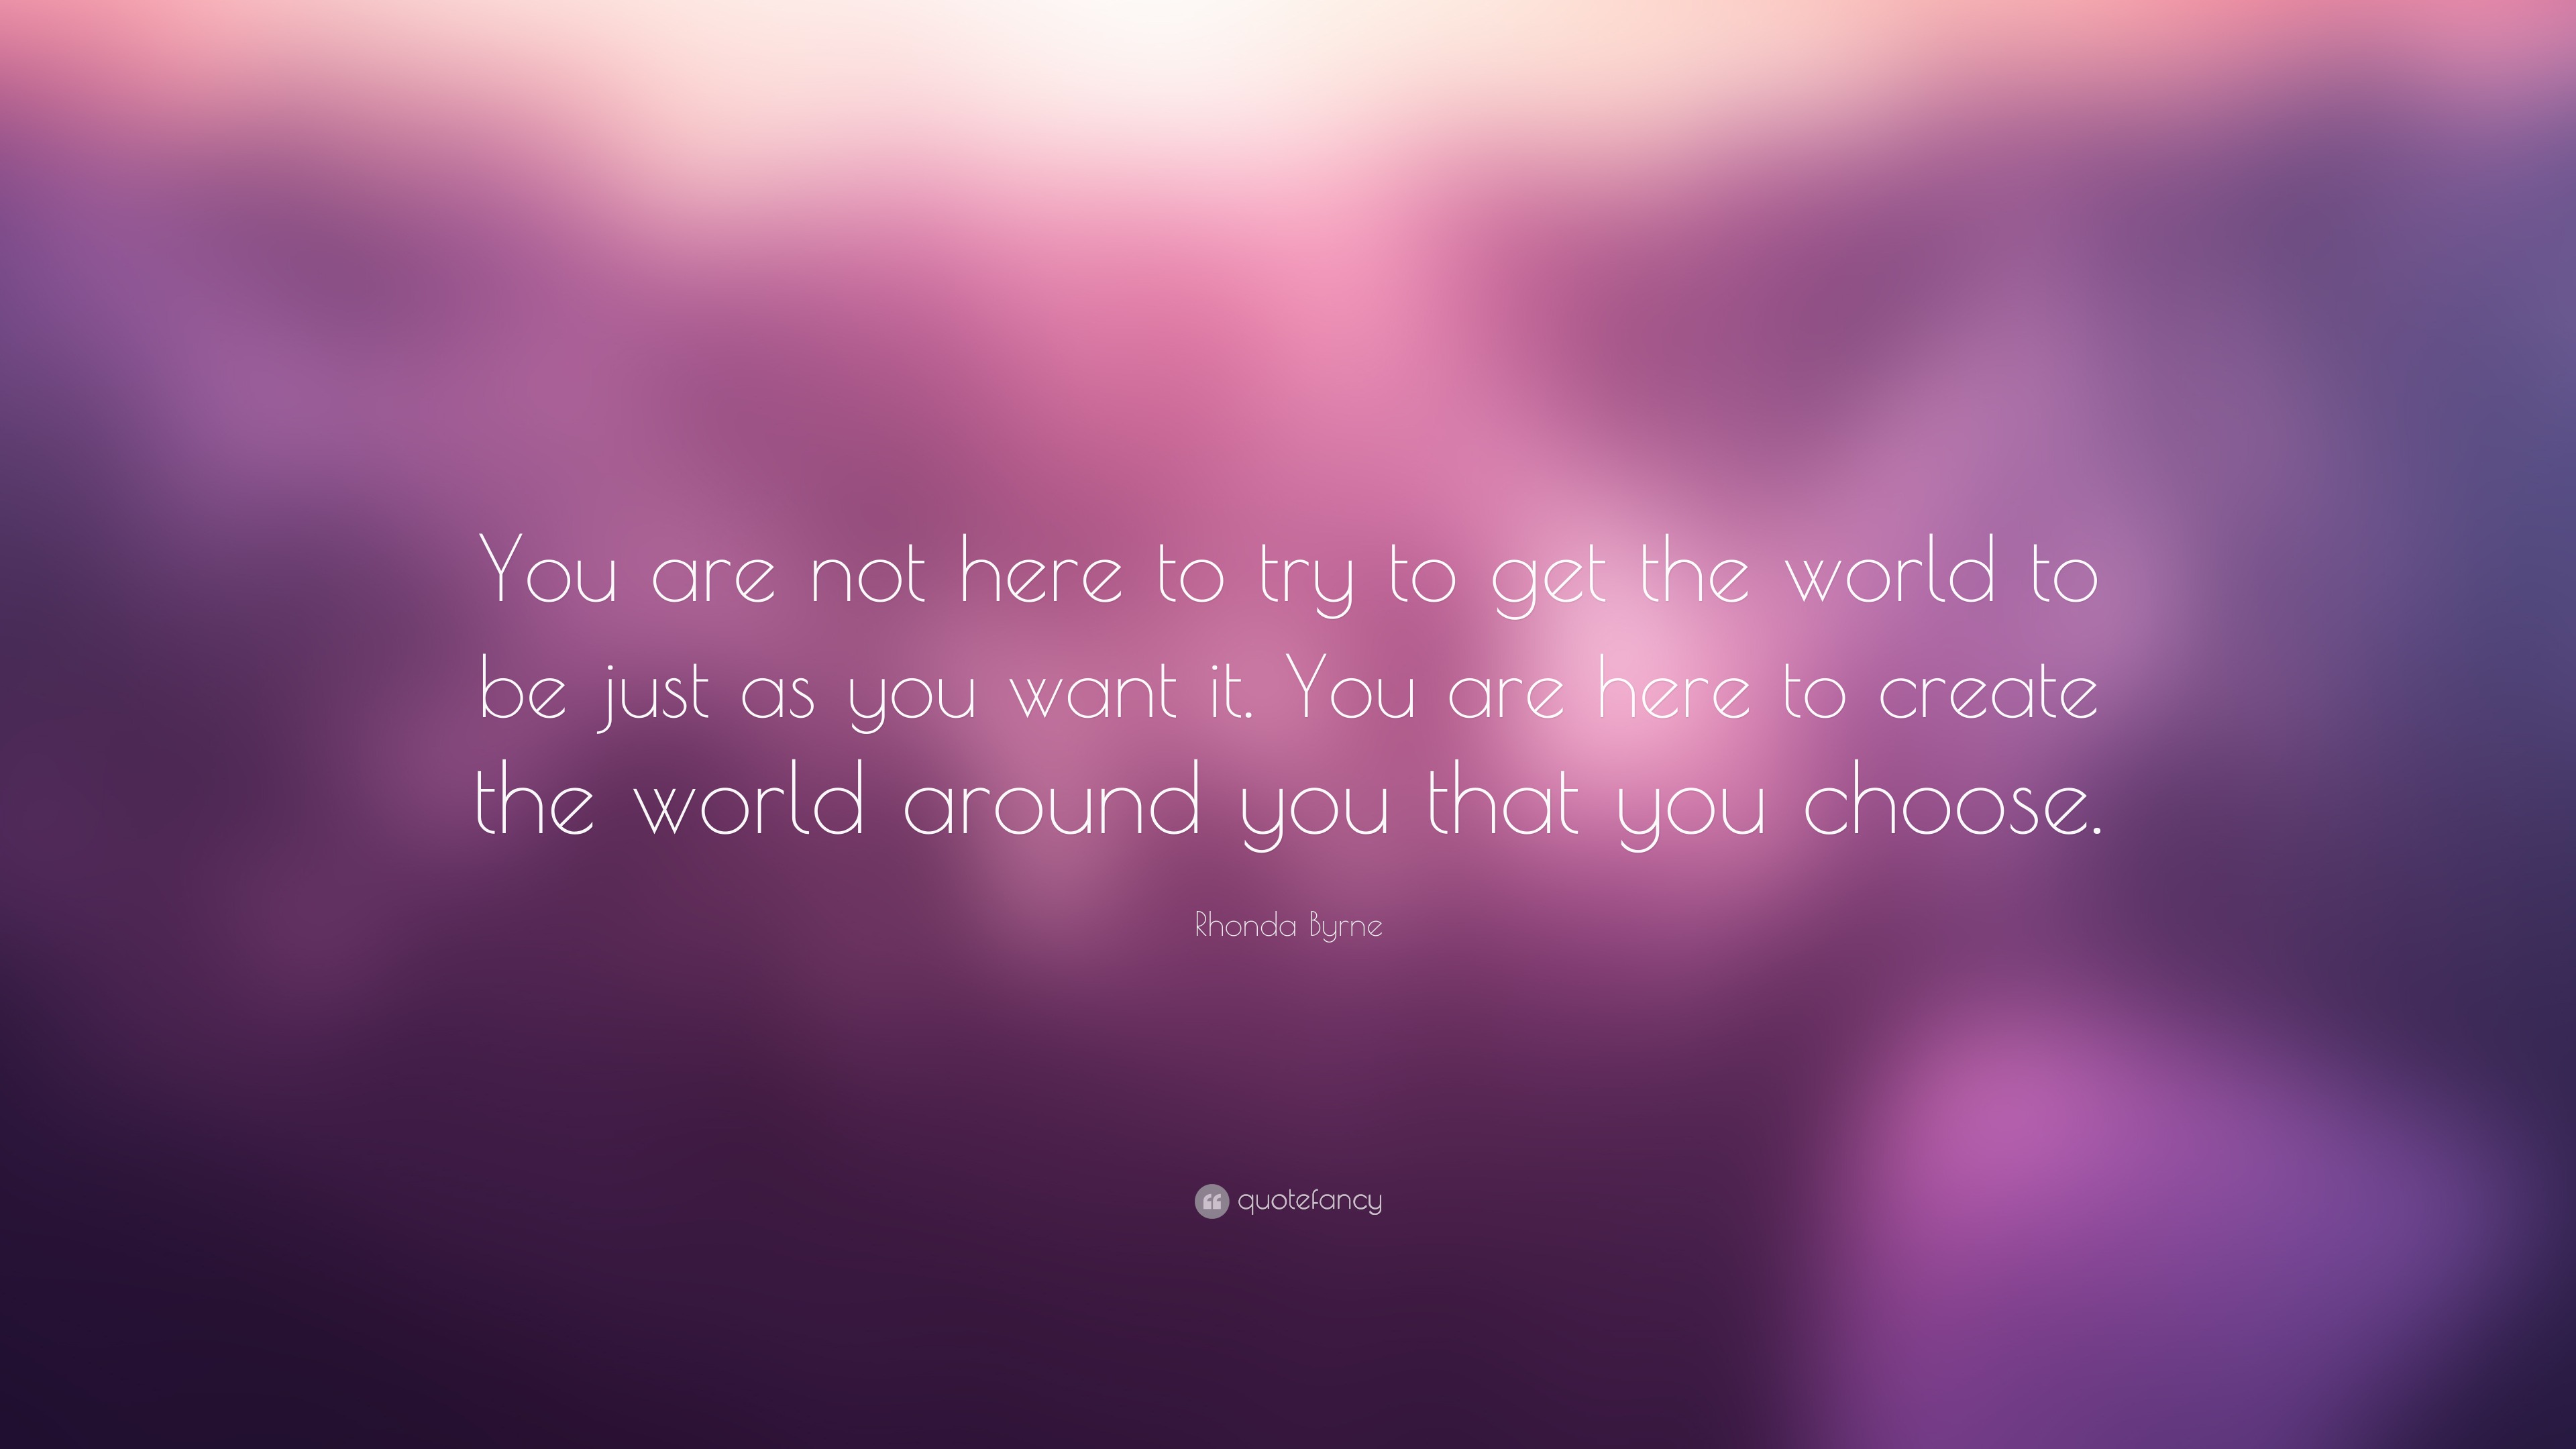 Rhonda Byrne Quote: “You are not here to try to get the world to be ...